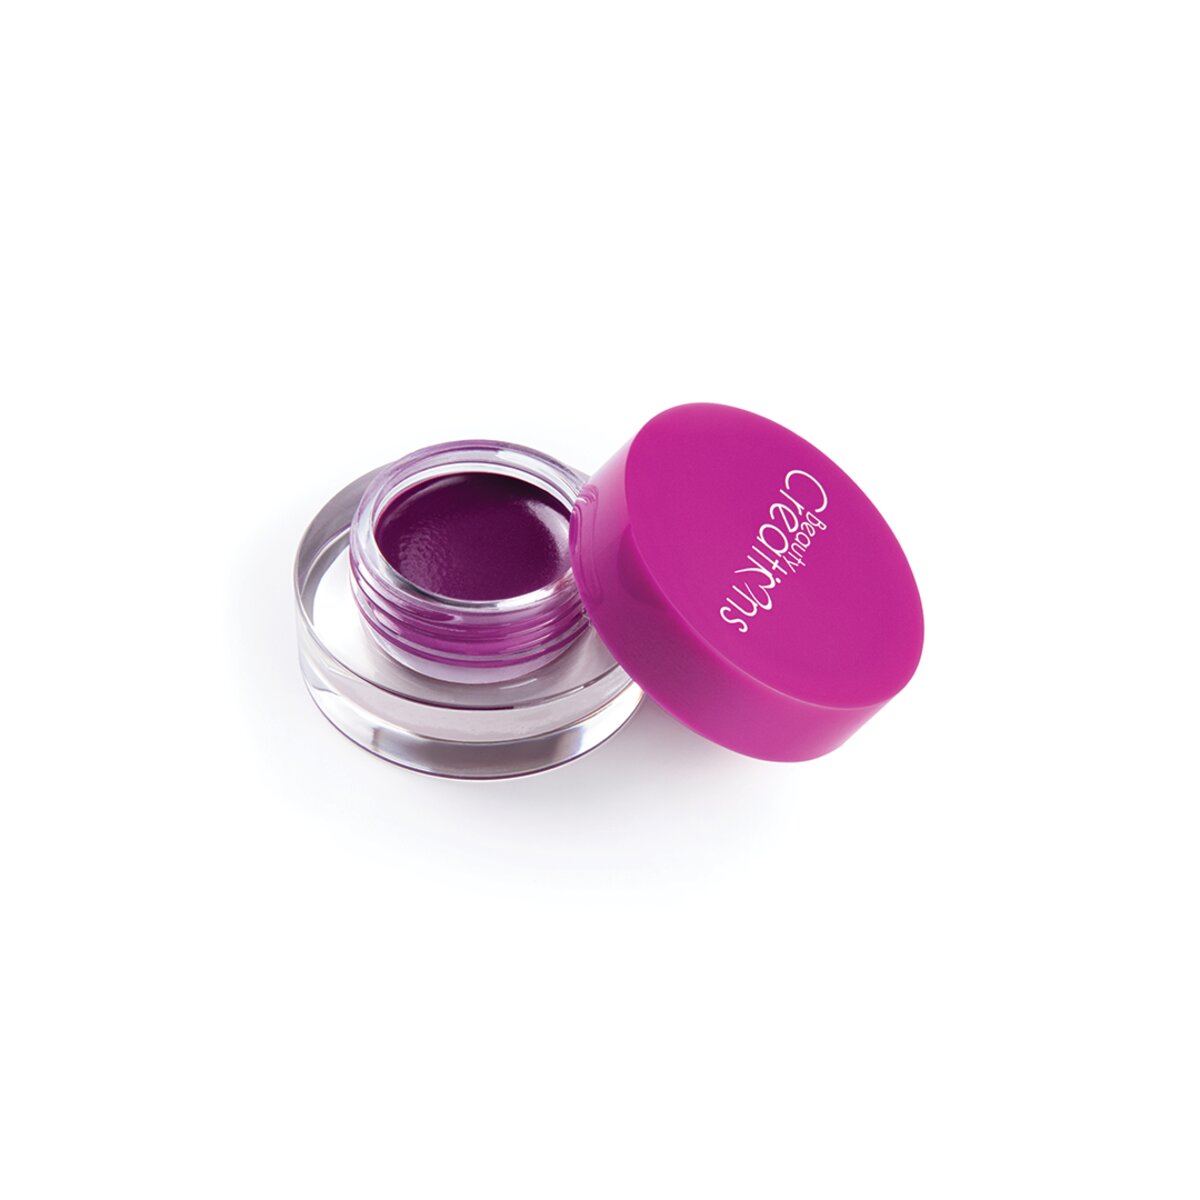 DARE TO BE BRIGHT GEL LINER POT BERRY CRUSH - BEAUTY CREATIONS